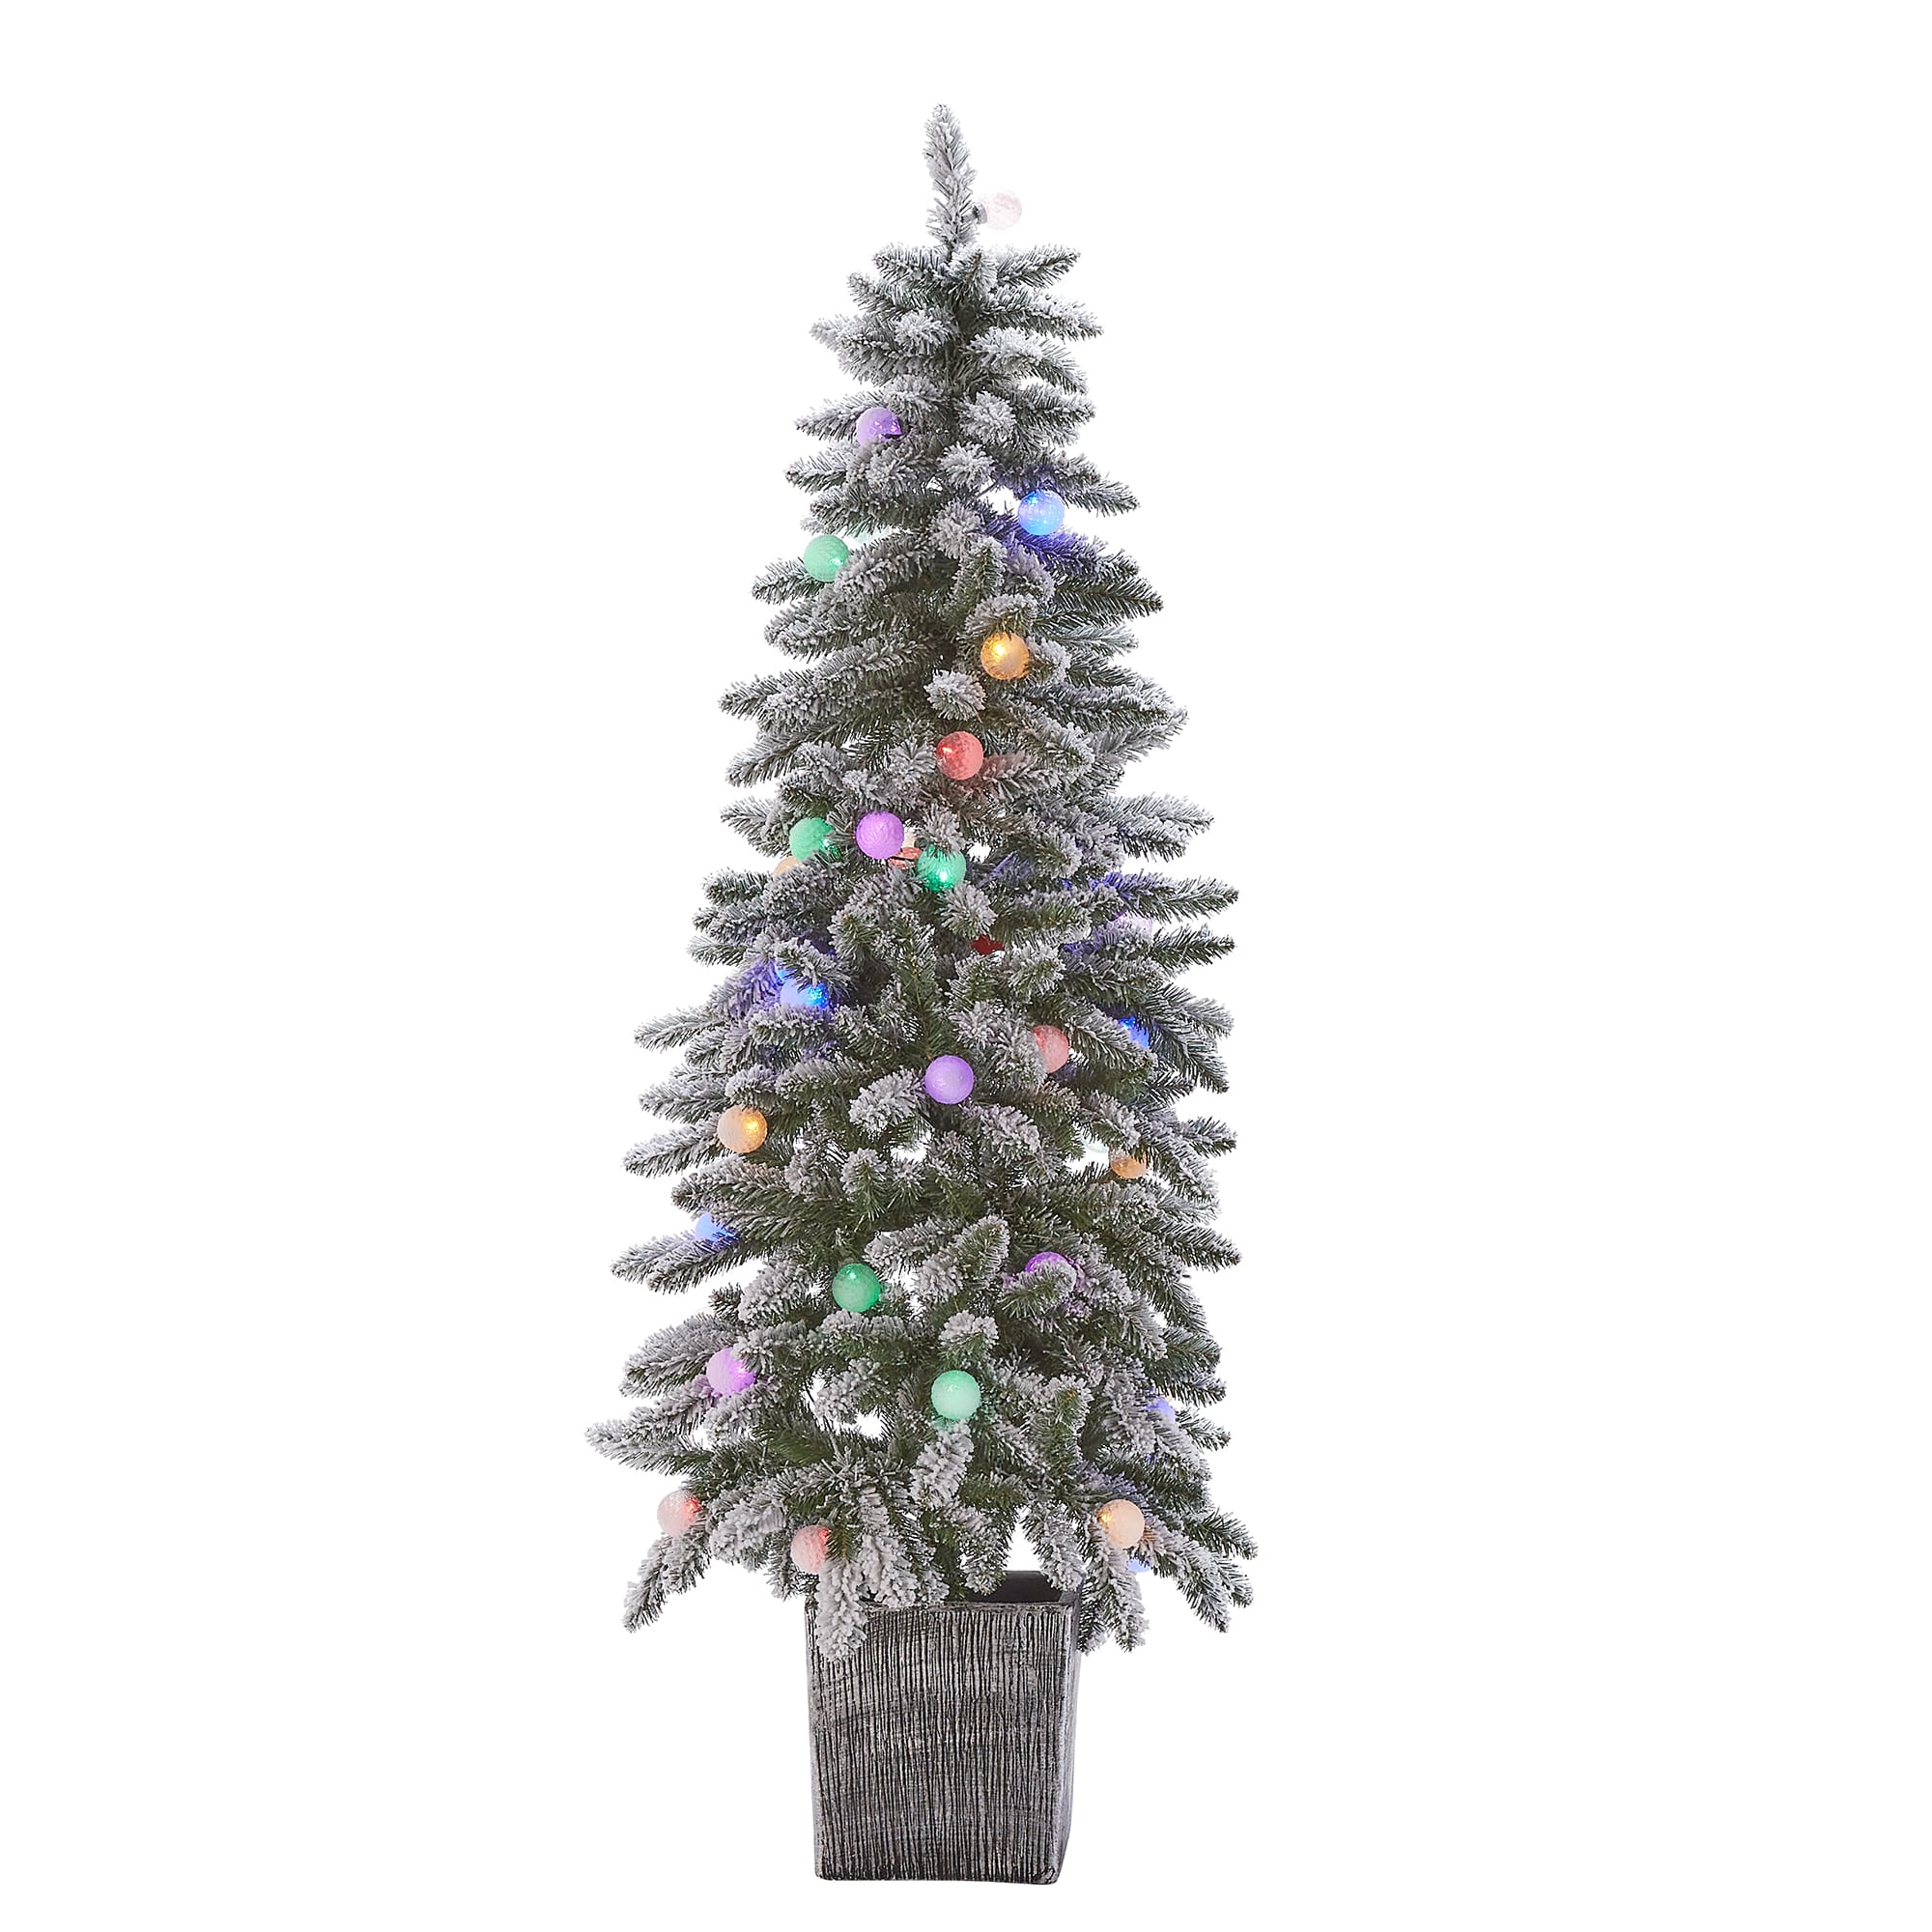 Maypex 5 ft. Green Lighted Flocked Spruce Artificial Christmas Tree